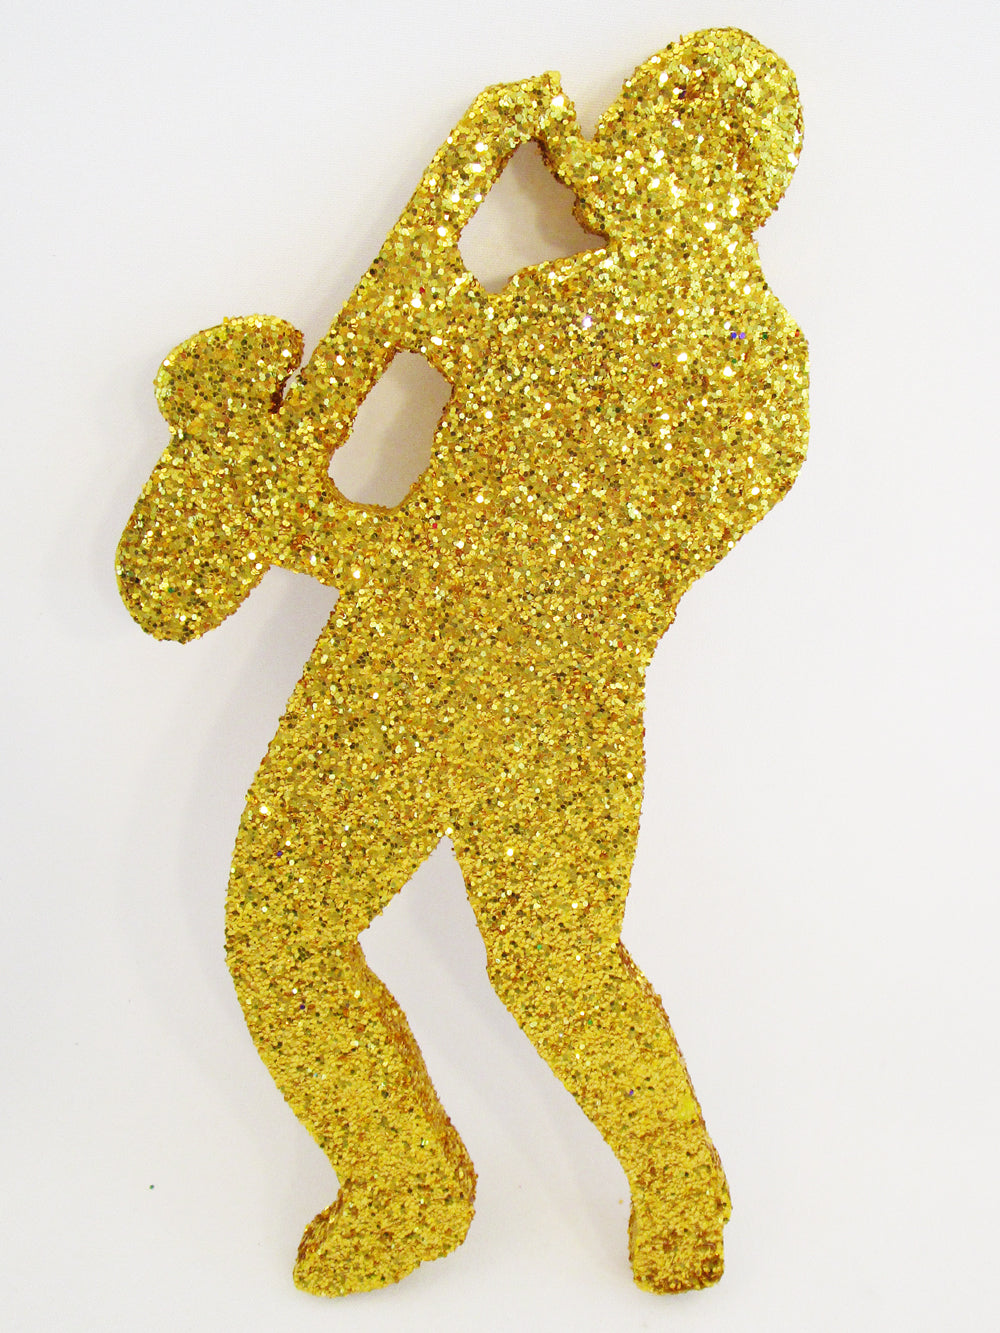 Jazz Saxophone player cutout - Designs by Ginny